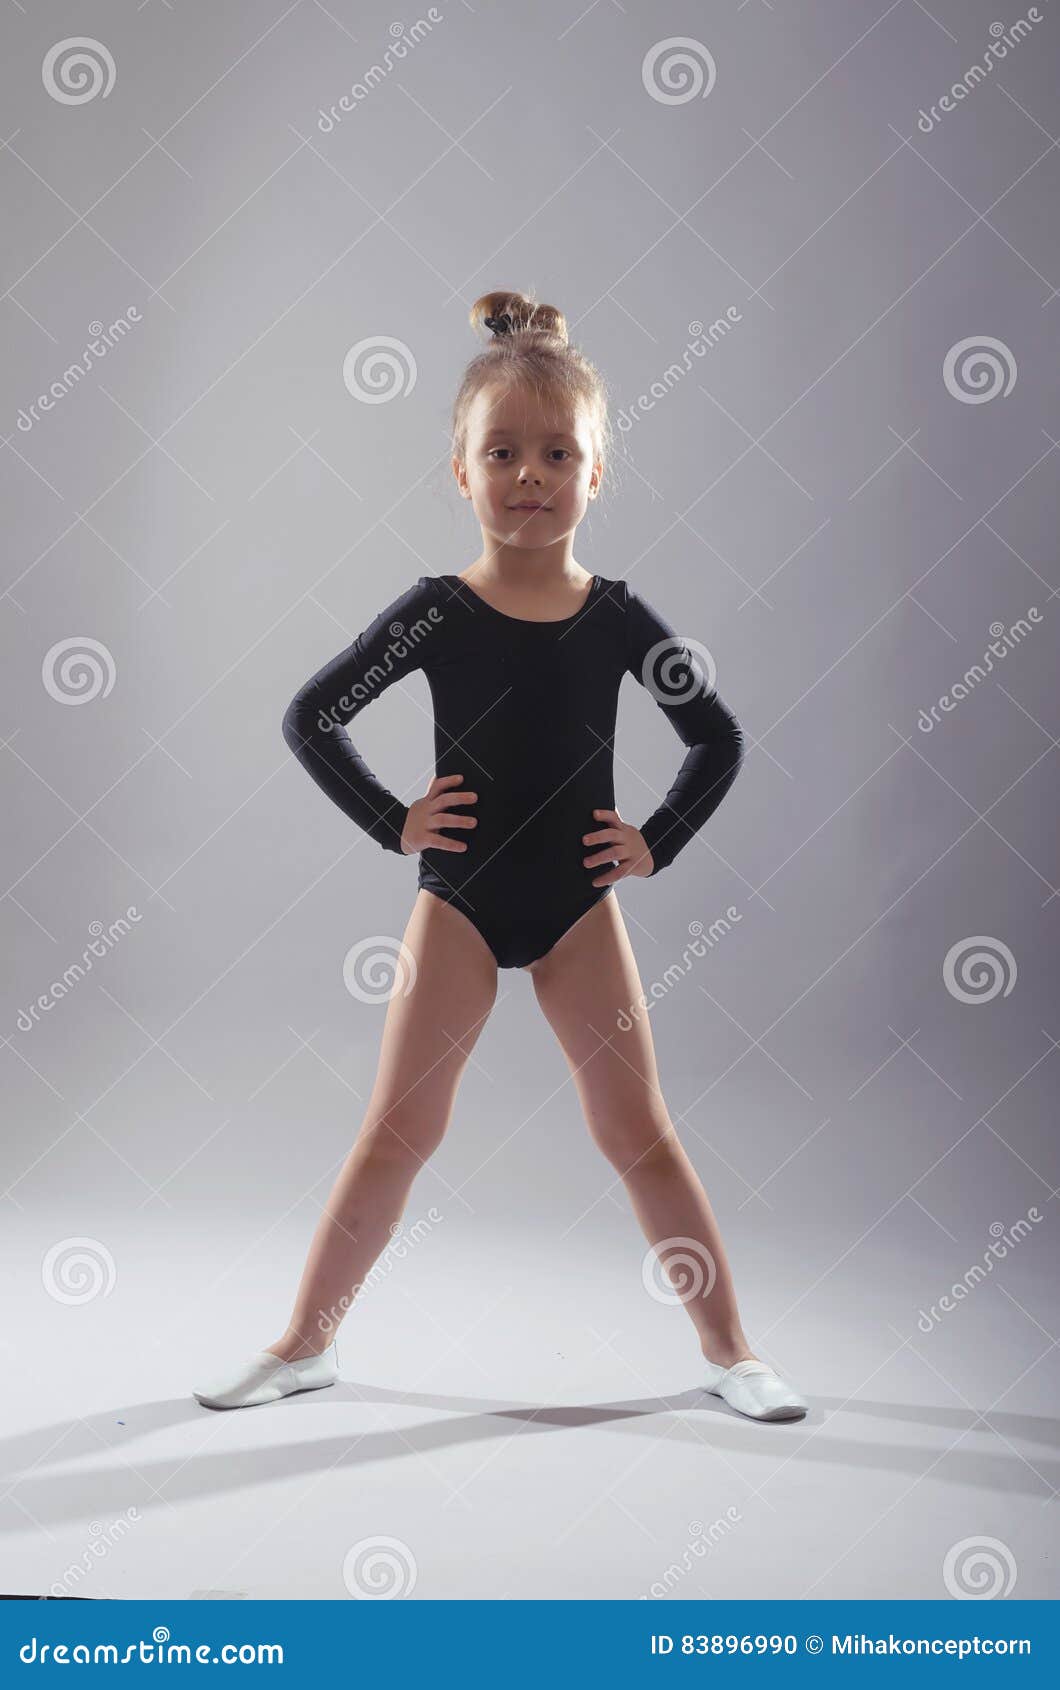 Little Girl in Black Tights Dancing on a Gray Background. Stock